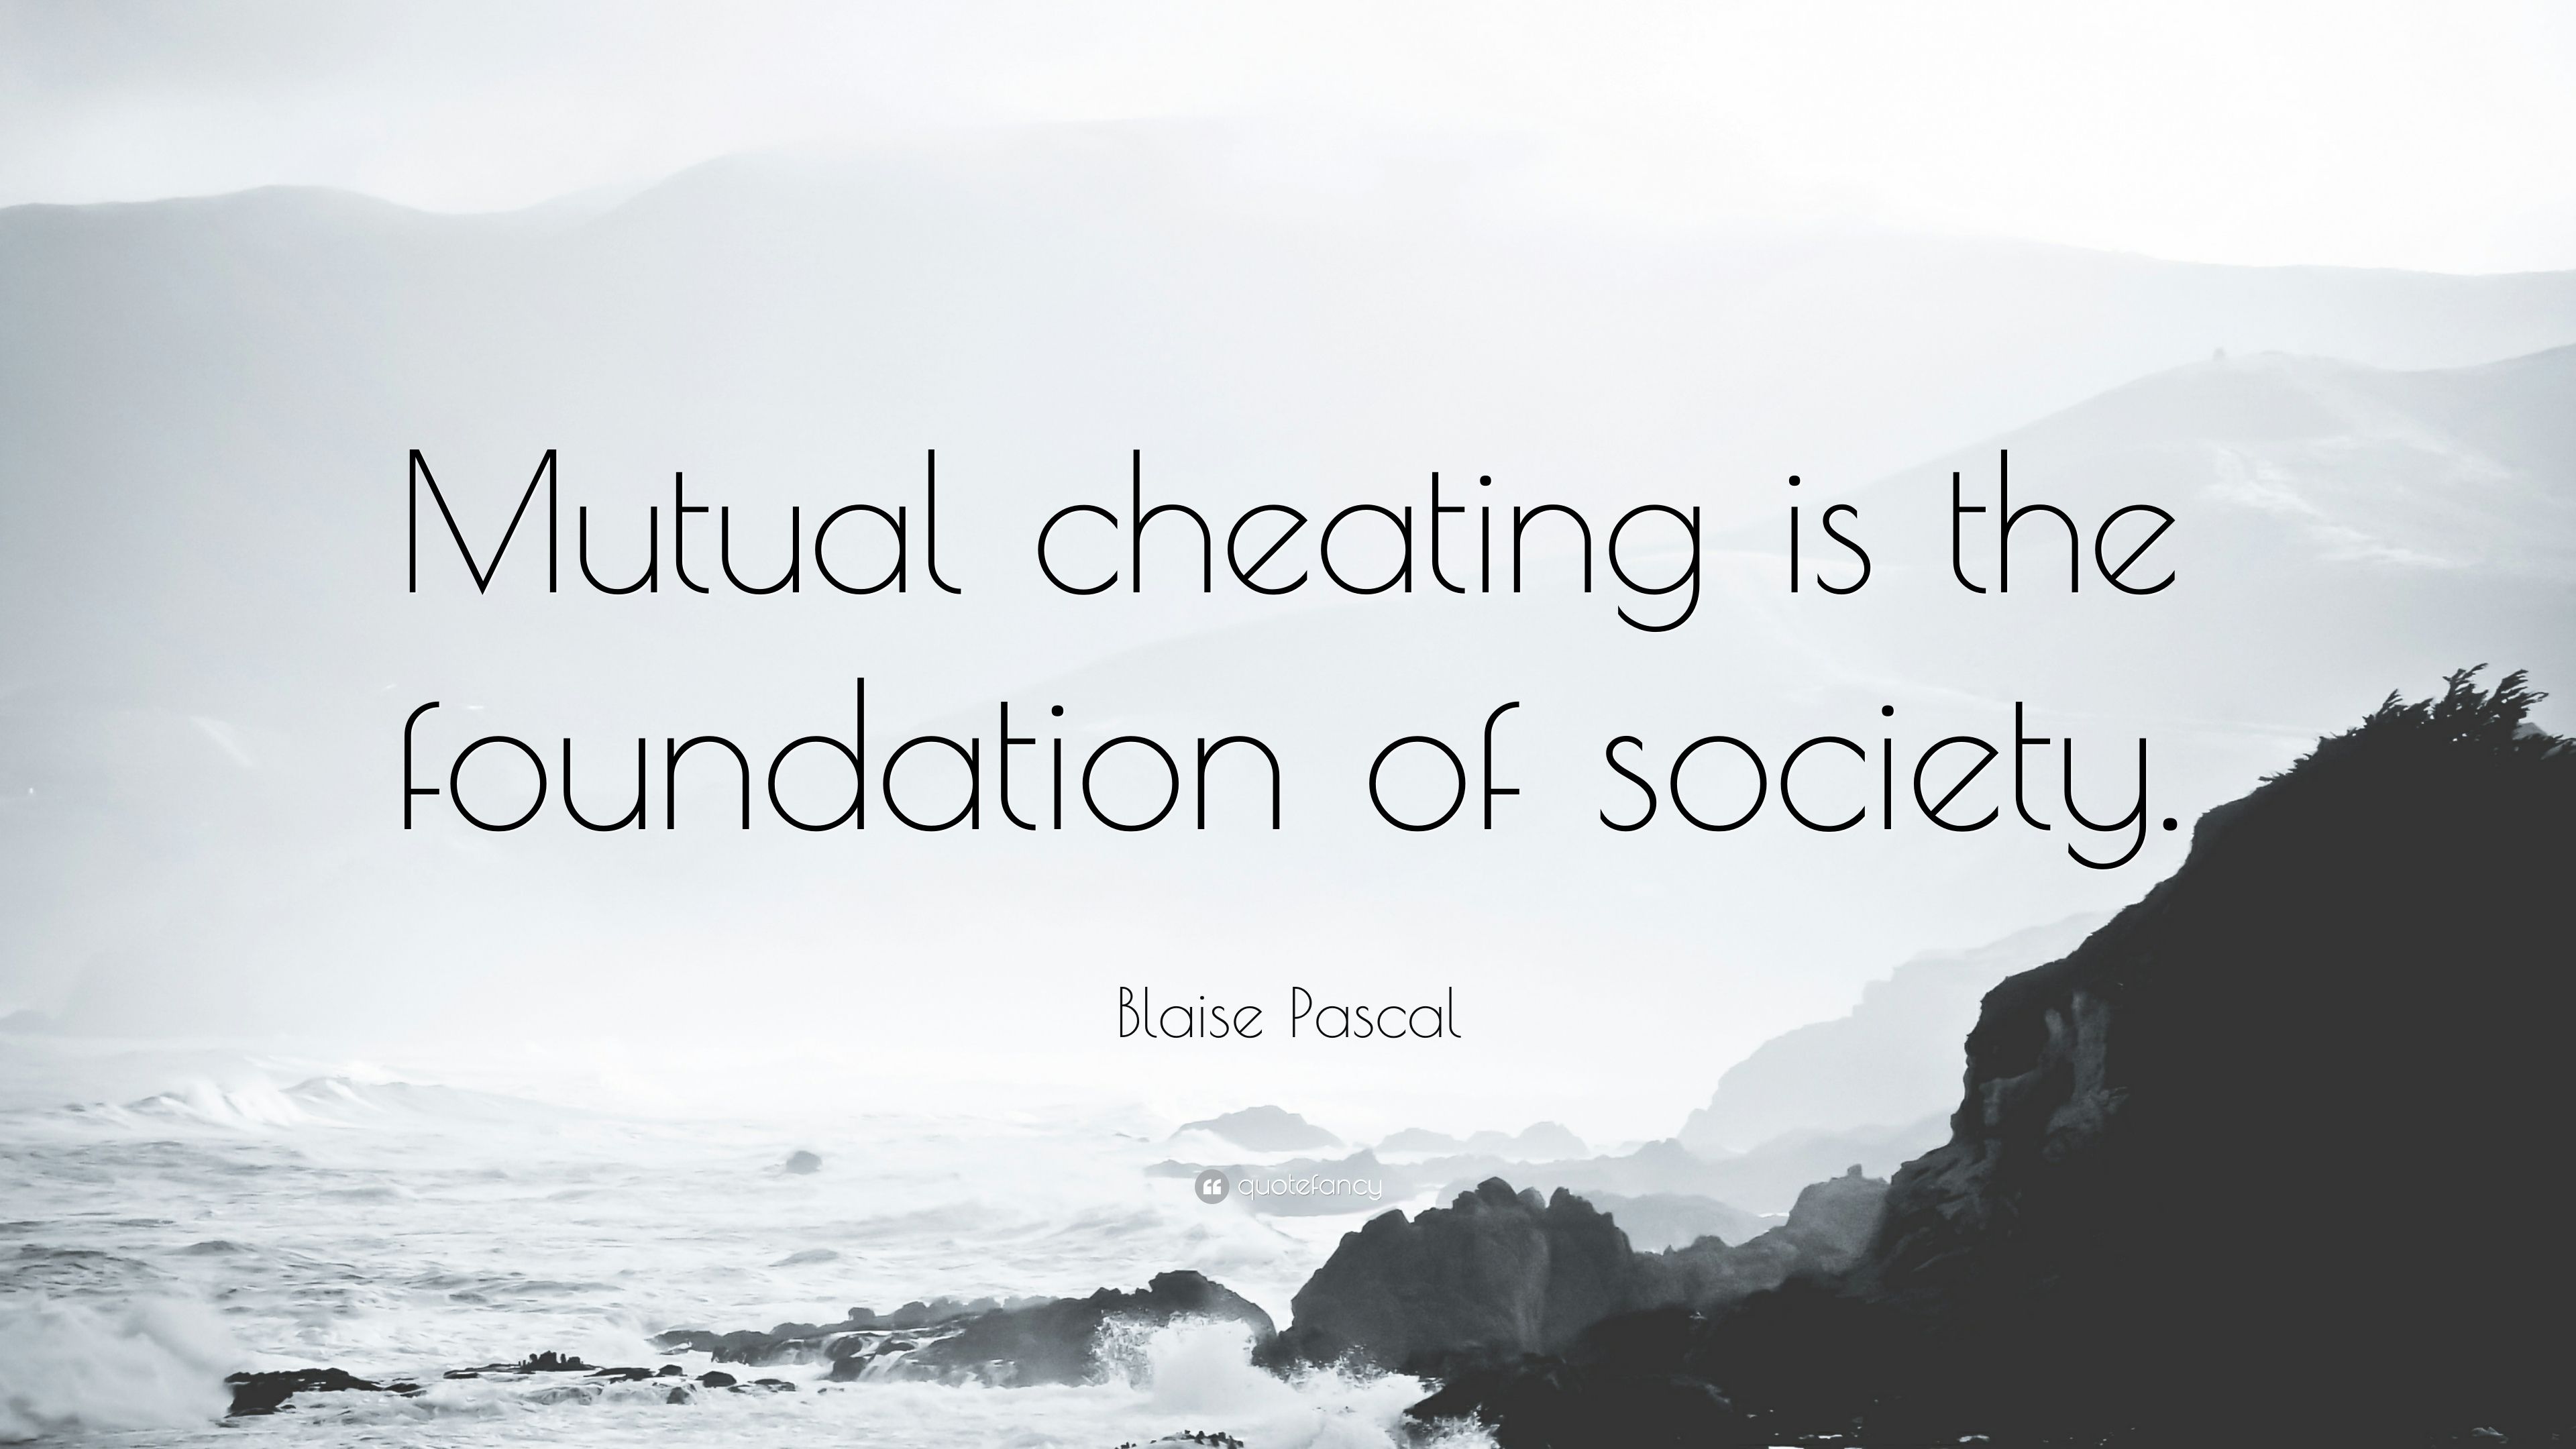 Blaise Pascal Quote: “Mutual cheating is the foundation of society.” (7 wallpaper)